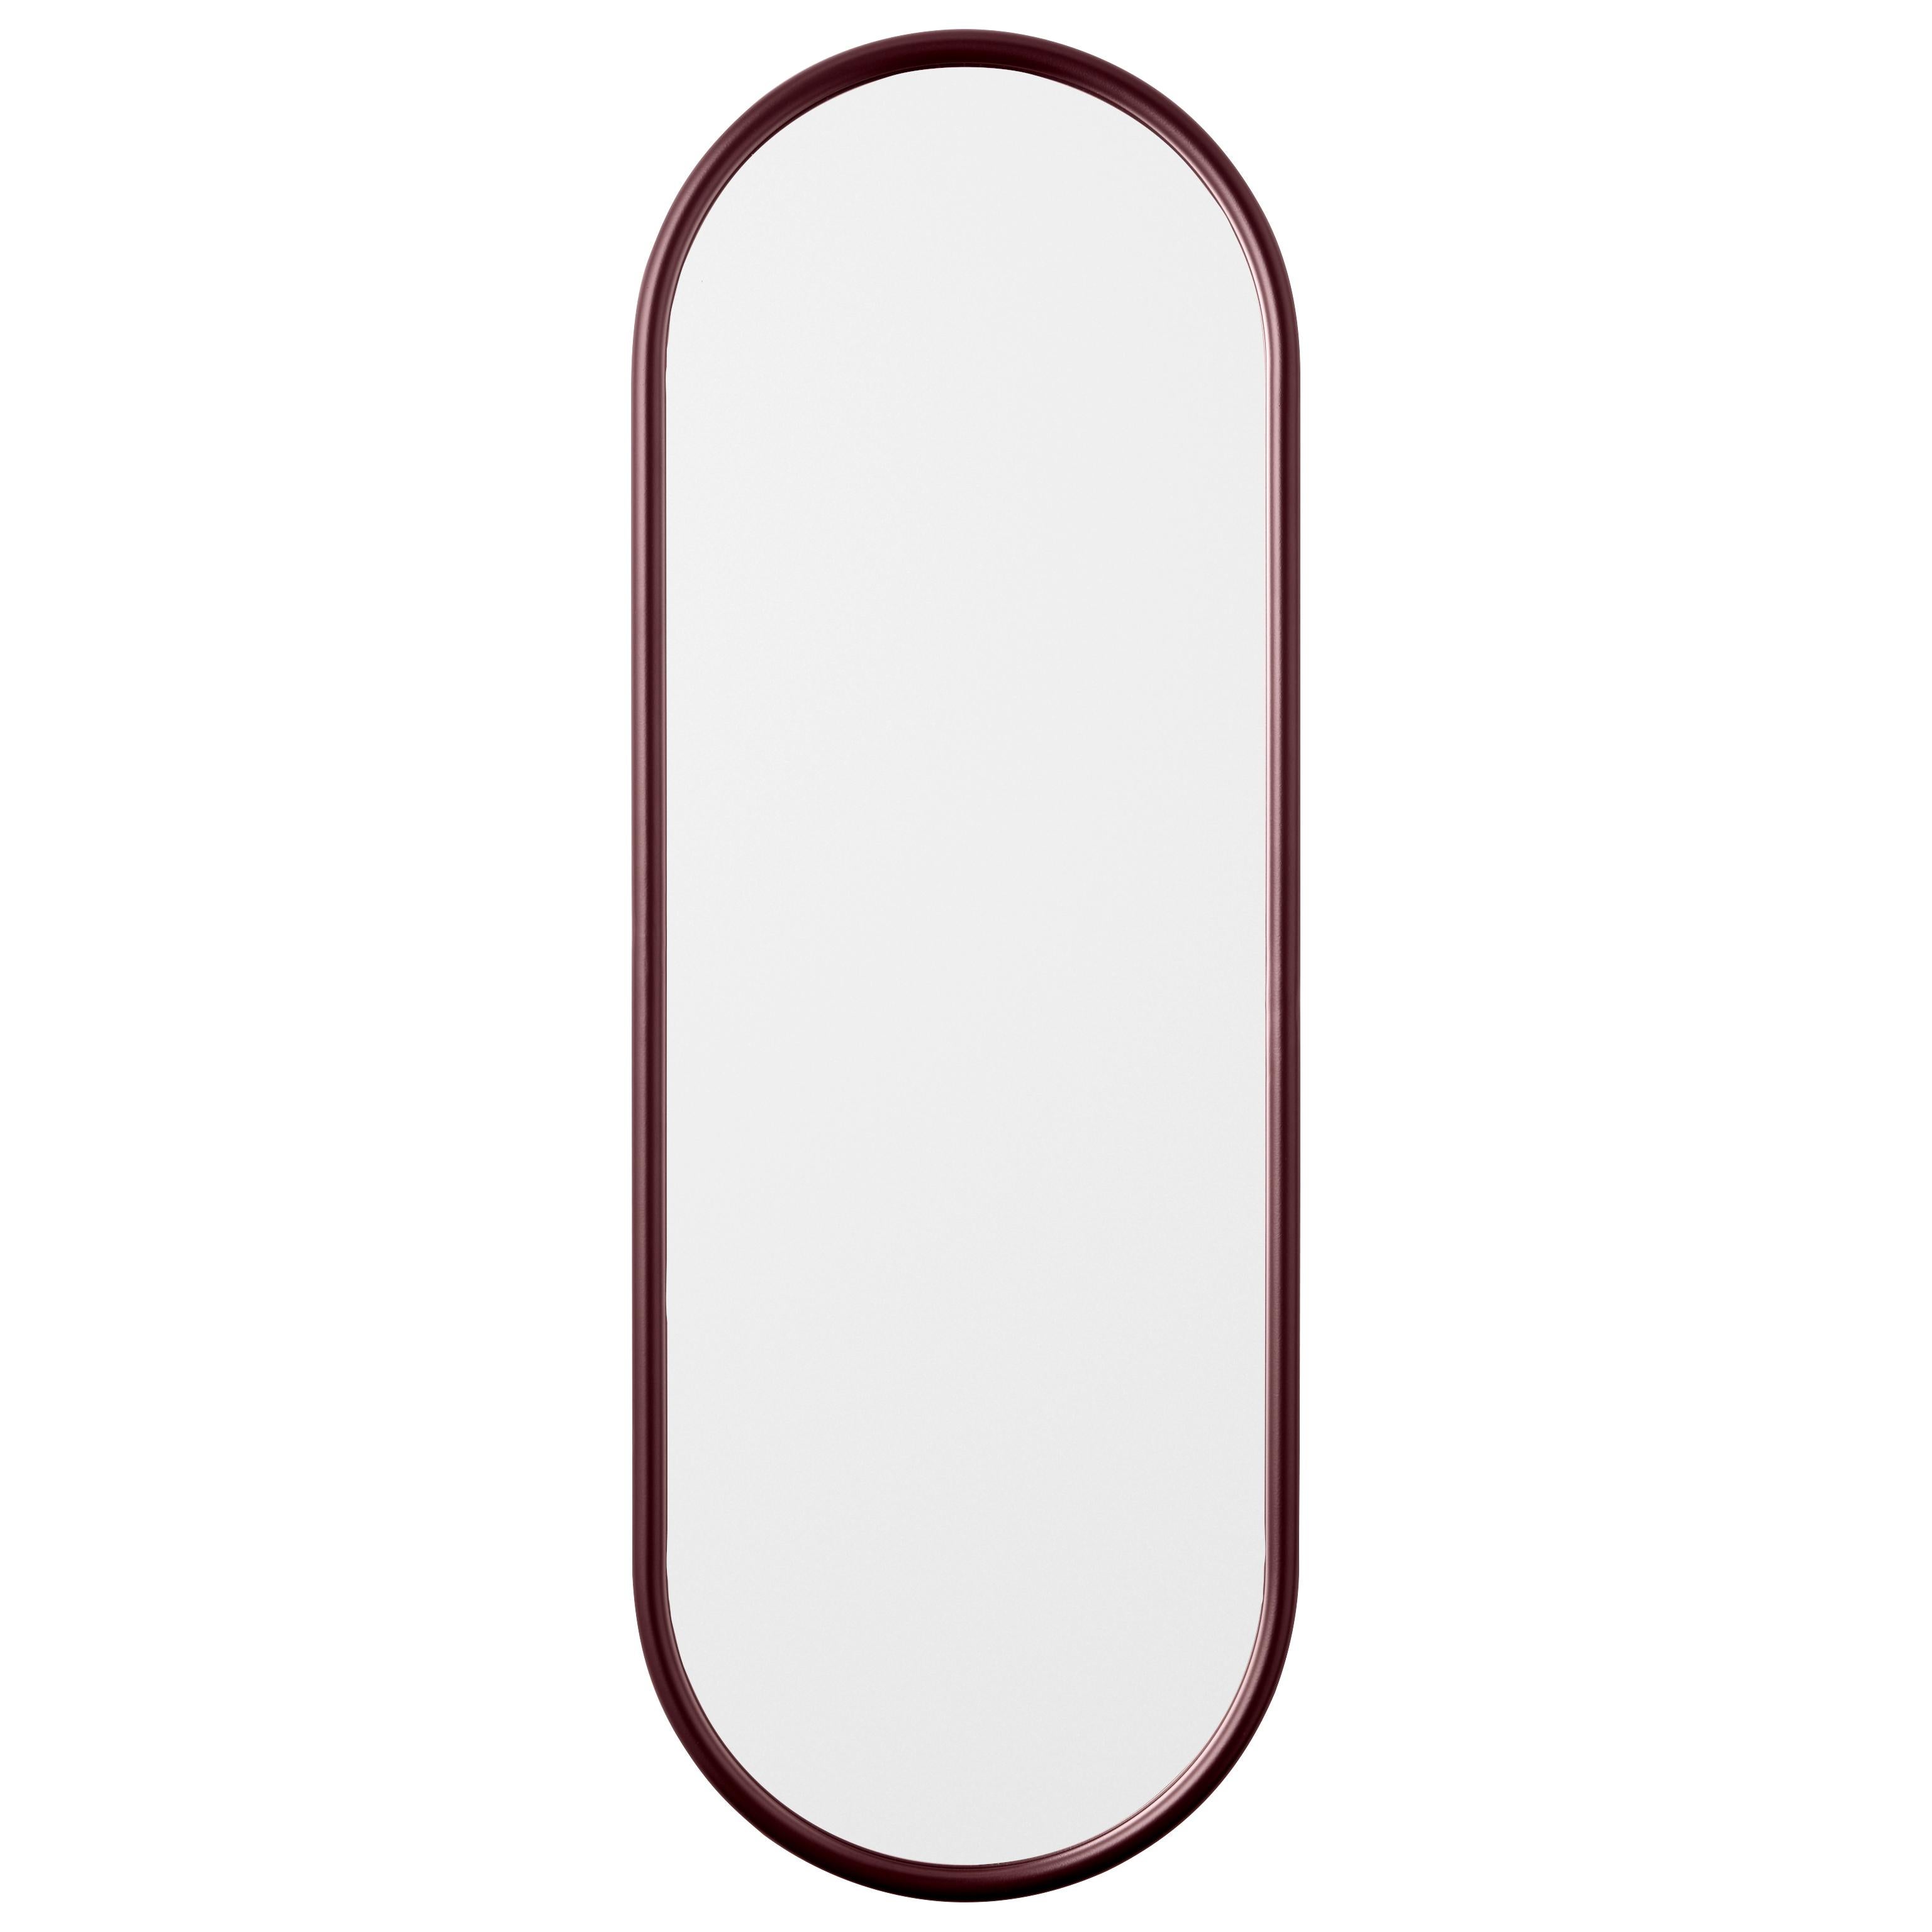 Angui Bordeaux oval large mirror by AYTM
Dimensions: 39 x 2 x 108 cm
Materials: Glass, copper and MDF

The Angui mirror with its simple pipe-styled frame is a beauty for any bathroom, hallway, or maybe bedroom. Use a single one or add several